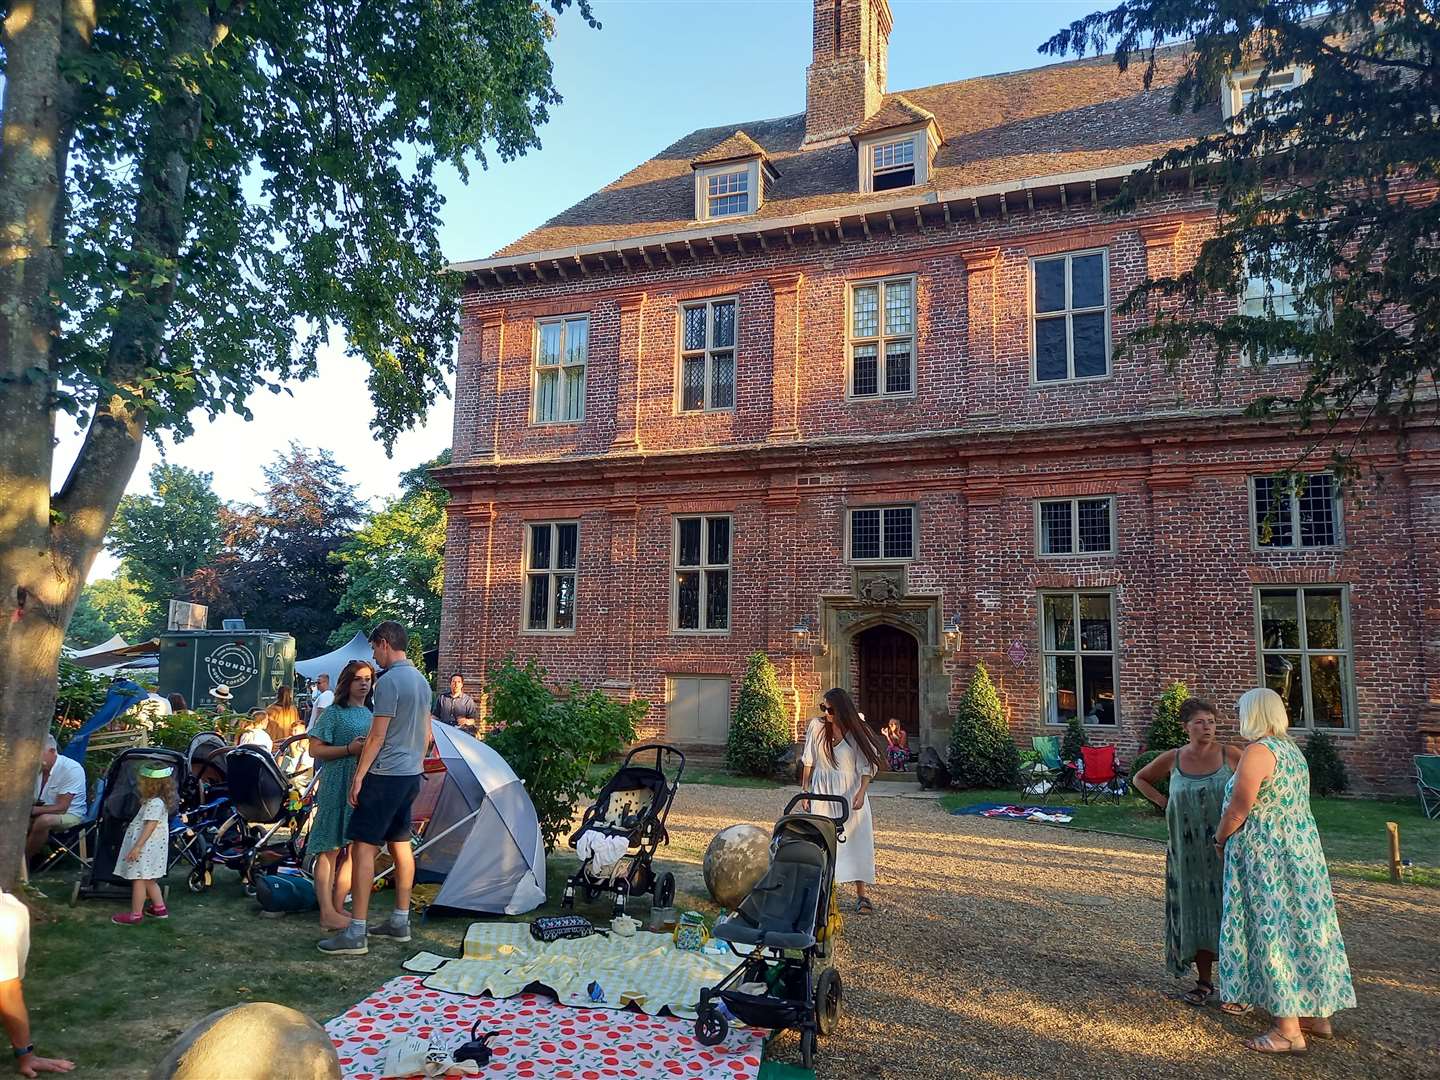 Against the backdrop of the old mansion, the festival proved a big success